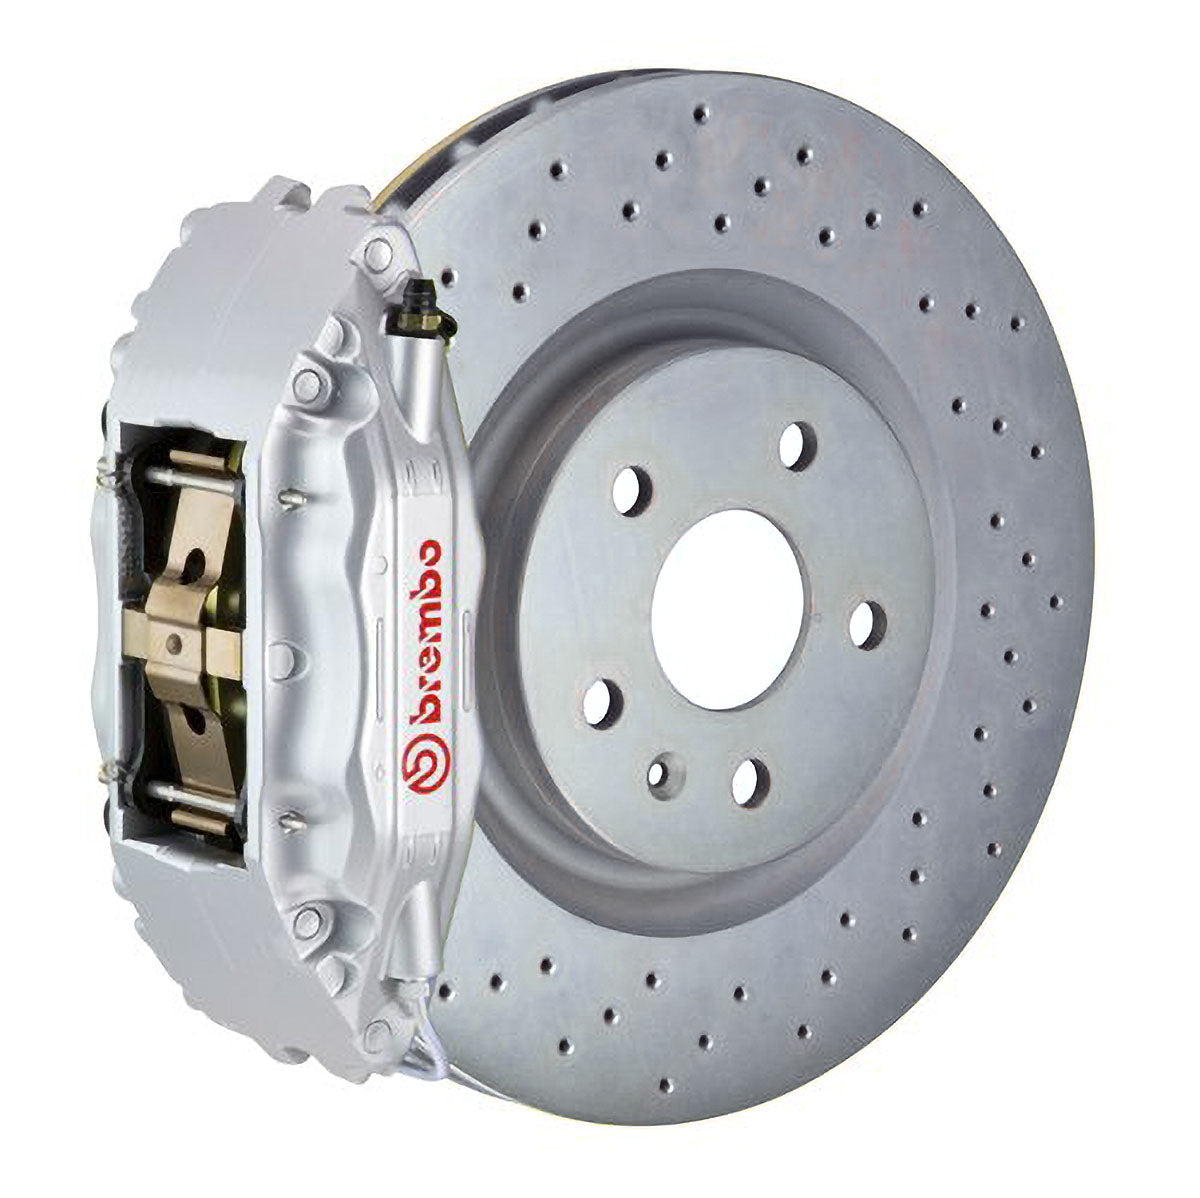 Brembo Front 332x32 One Piece Rotors + Four Piston Calipers